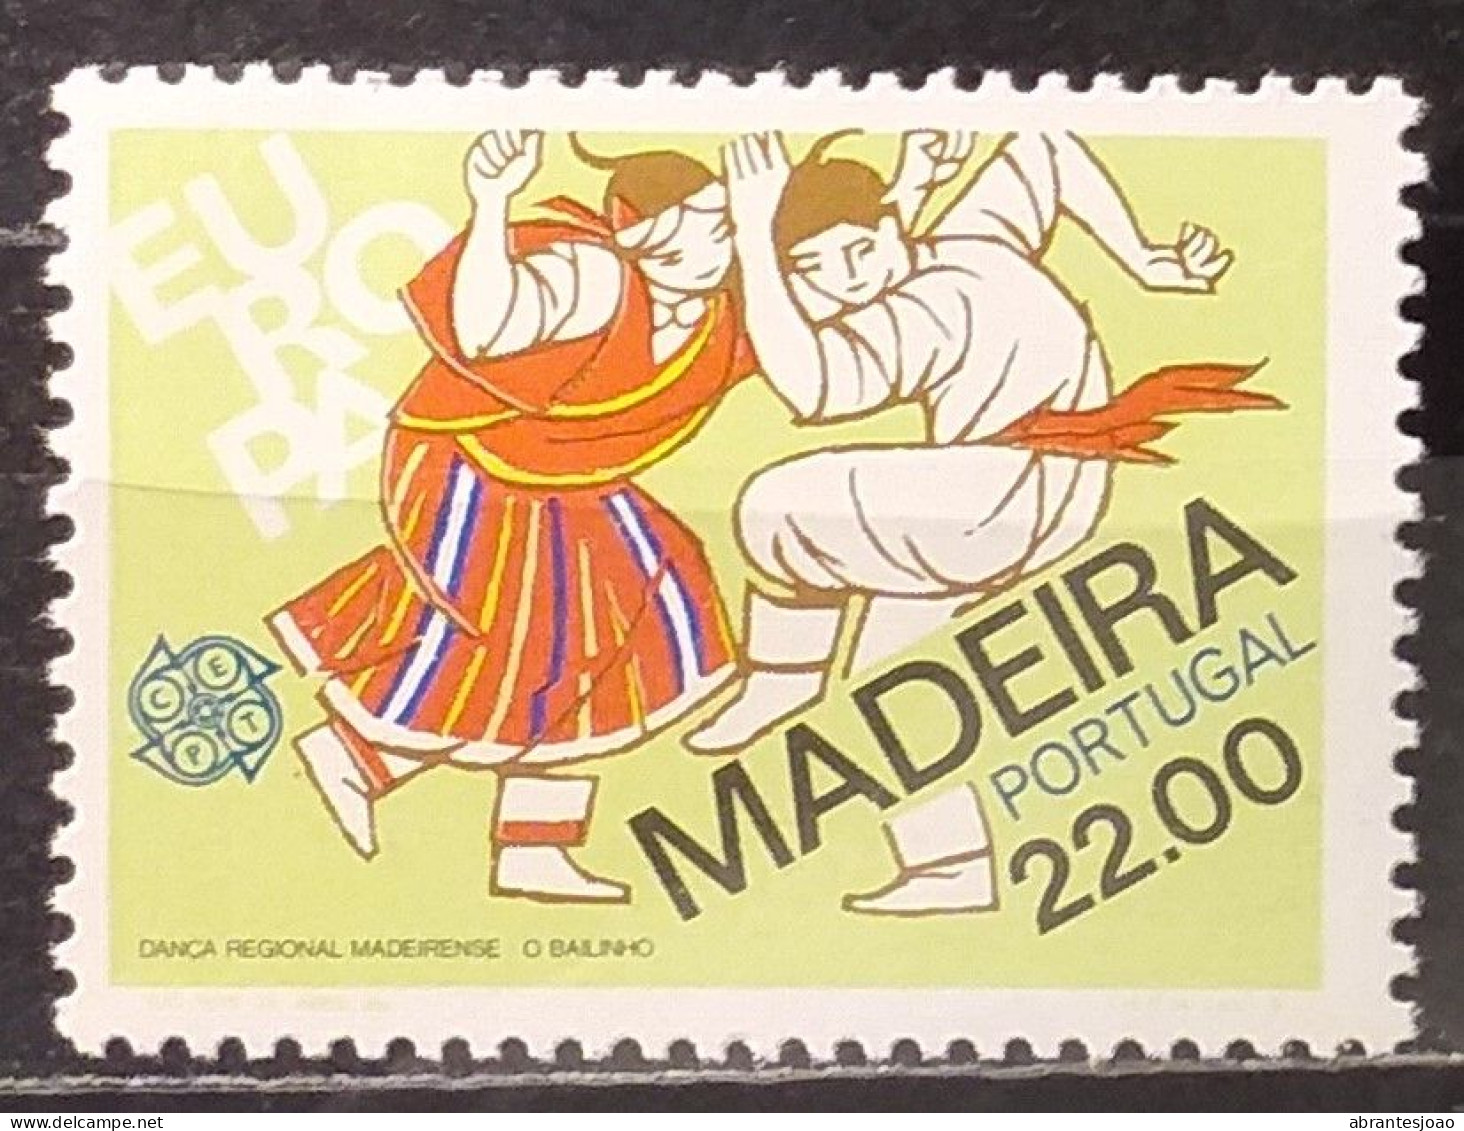 1981 - Portugal - EUROPA CEPT- Folklore - Continent, Azores And Madeira - MNH - 2+1+1 Stamps - Neufs